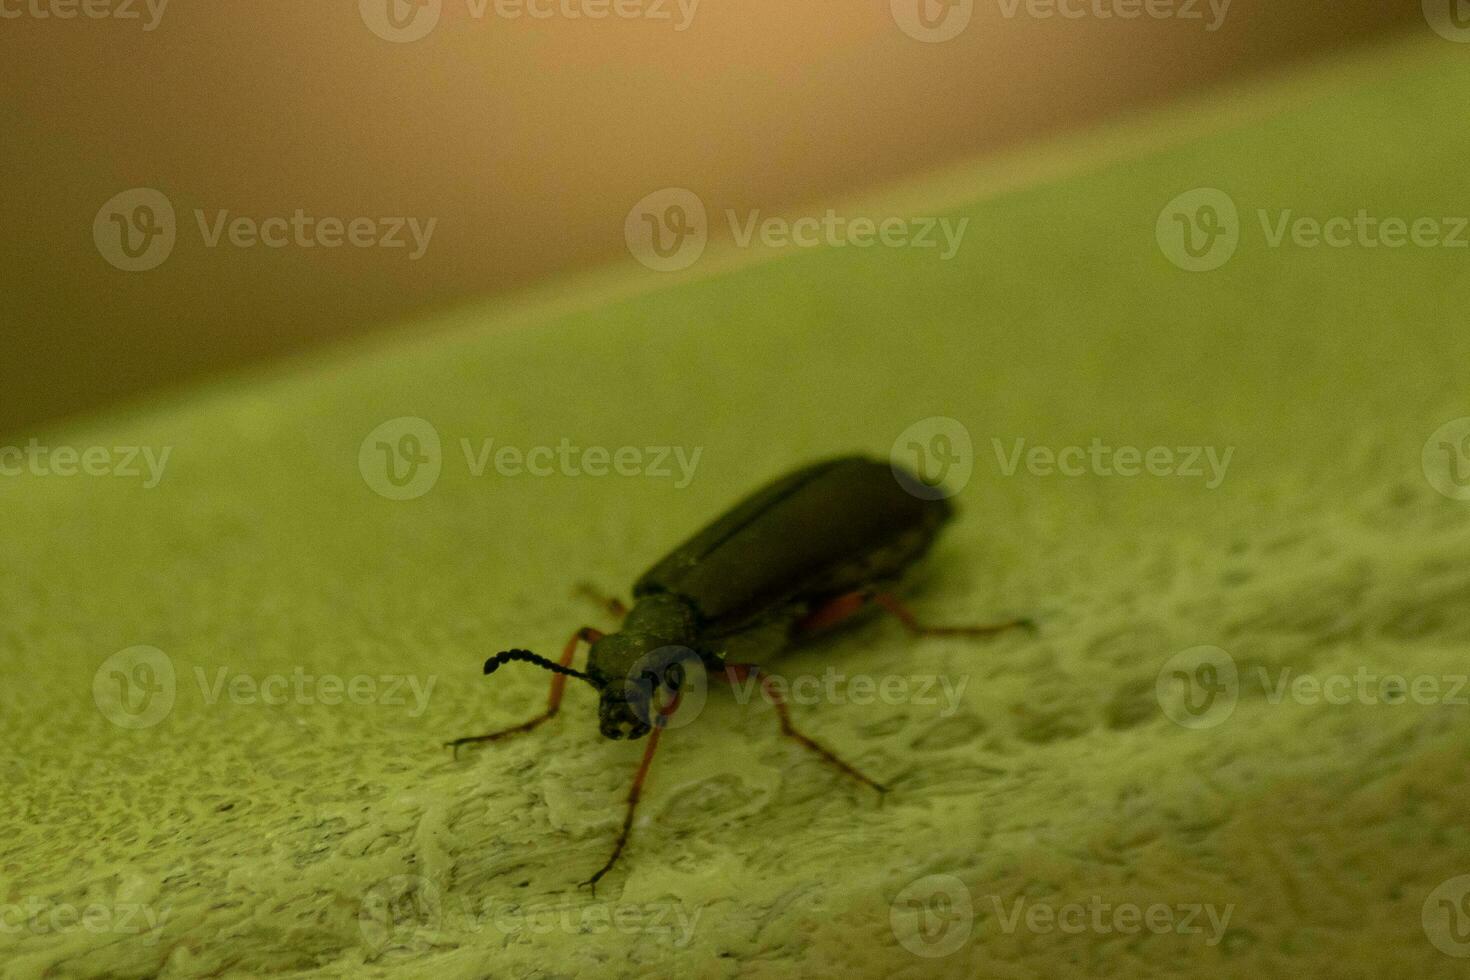 This cute little blister beetle insect sat here on the green leaf when I took this picture. The little black pincers facing me with the big black eyes. The little hairs on the legs sticking out. photo